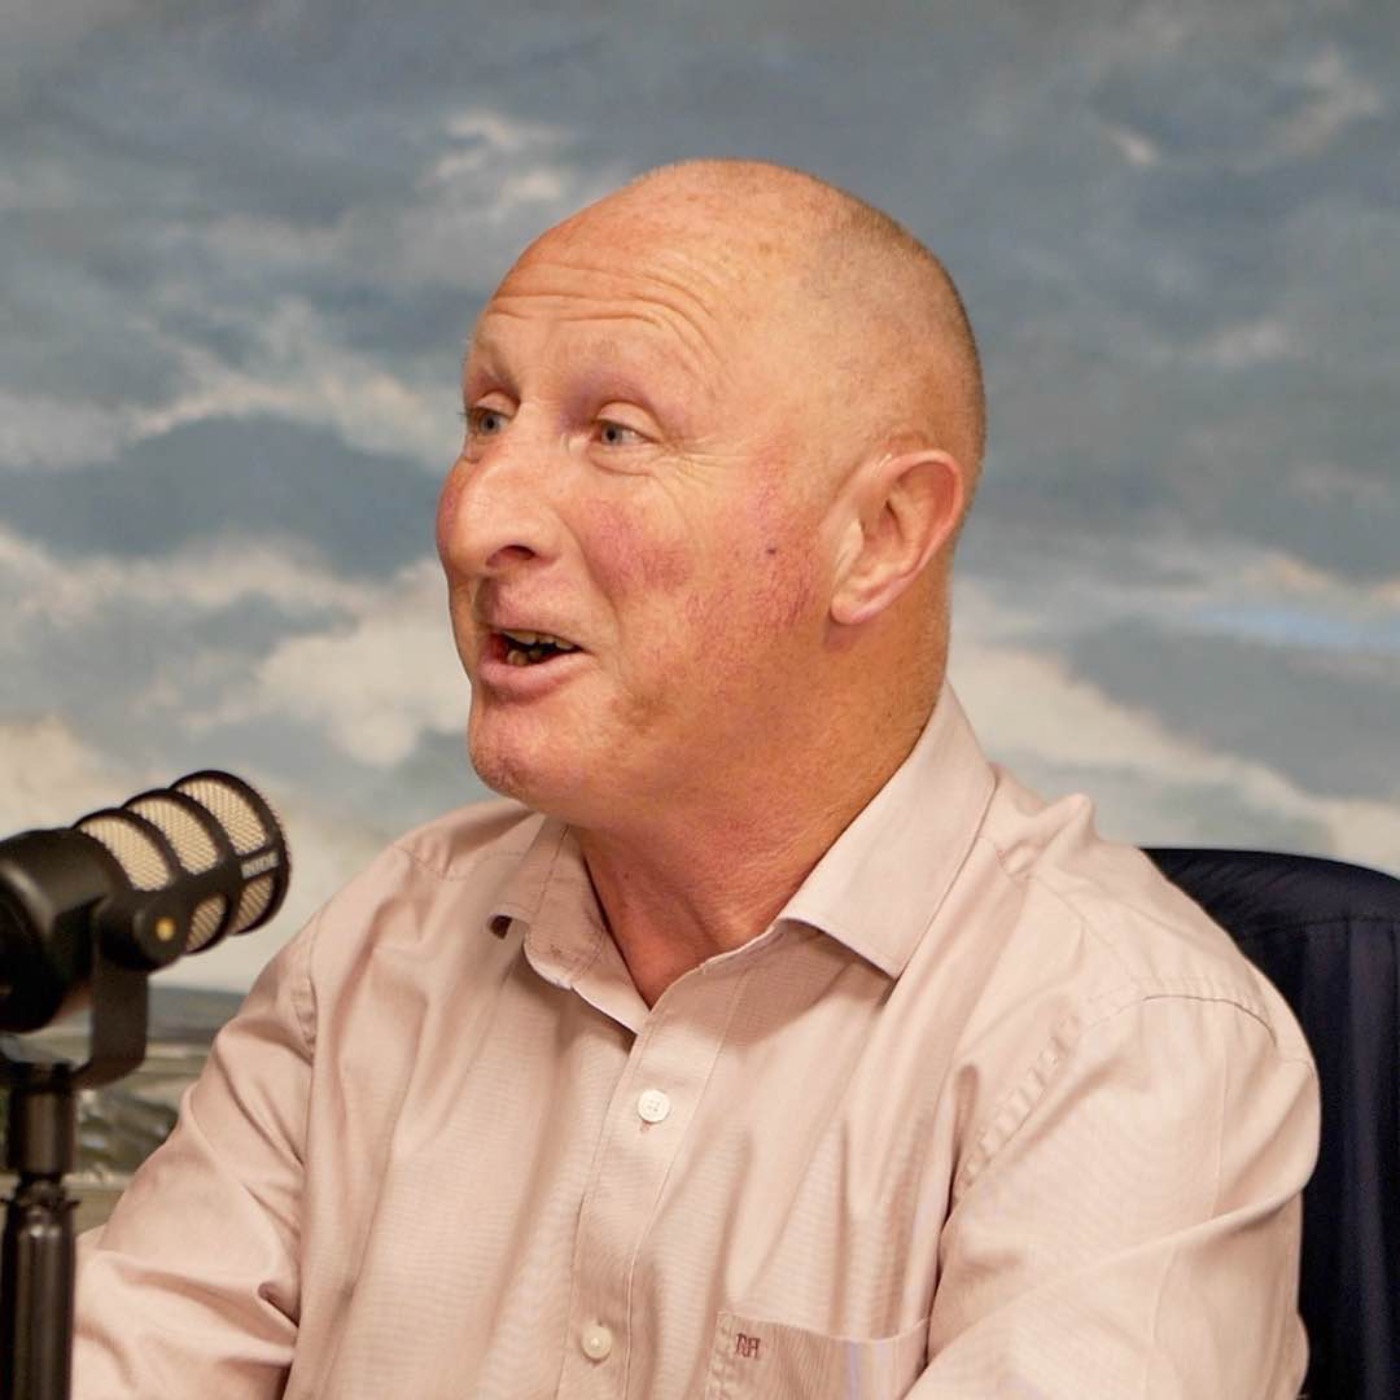 #175 Frank Horgan talks about years of addiction, Prison and where he is now in life